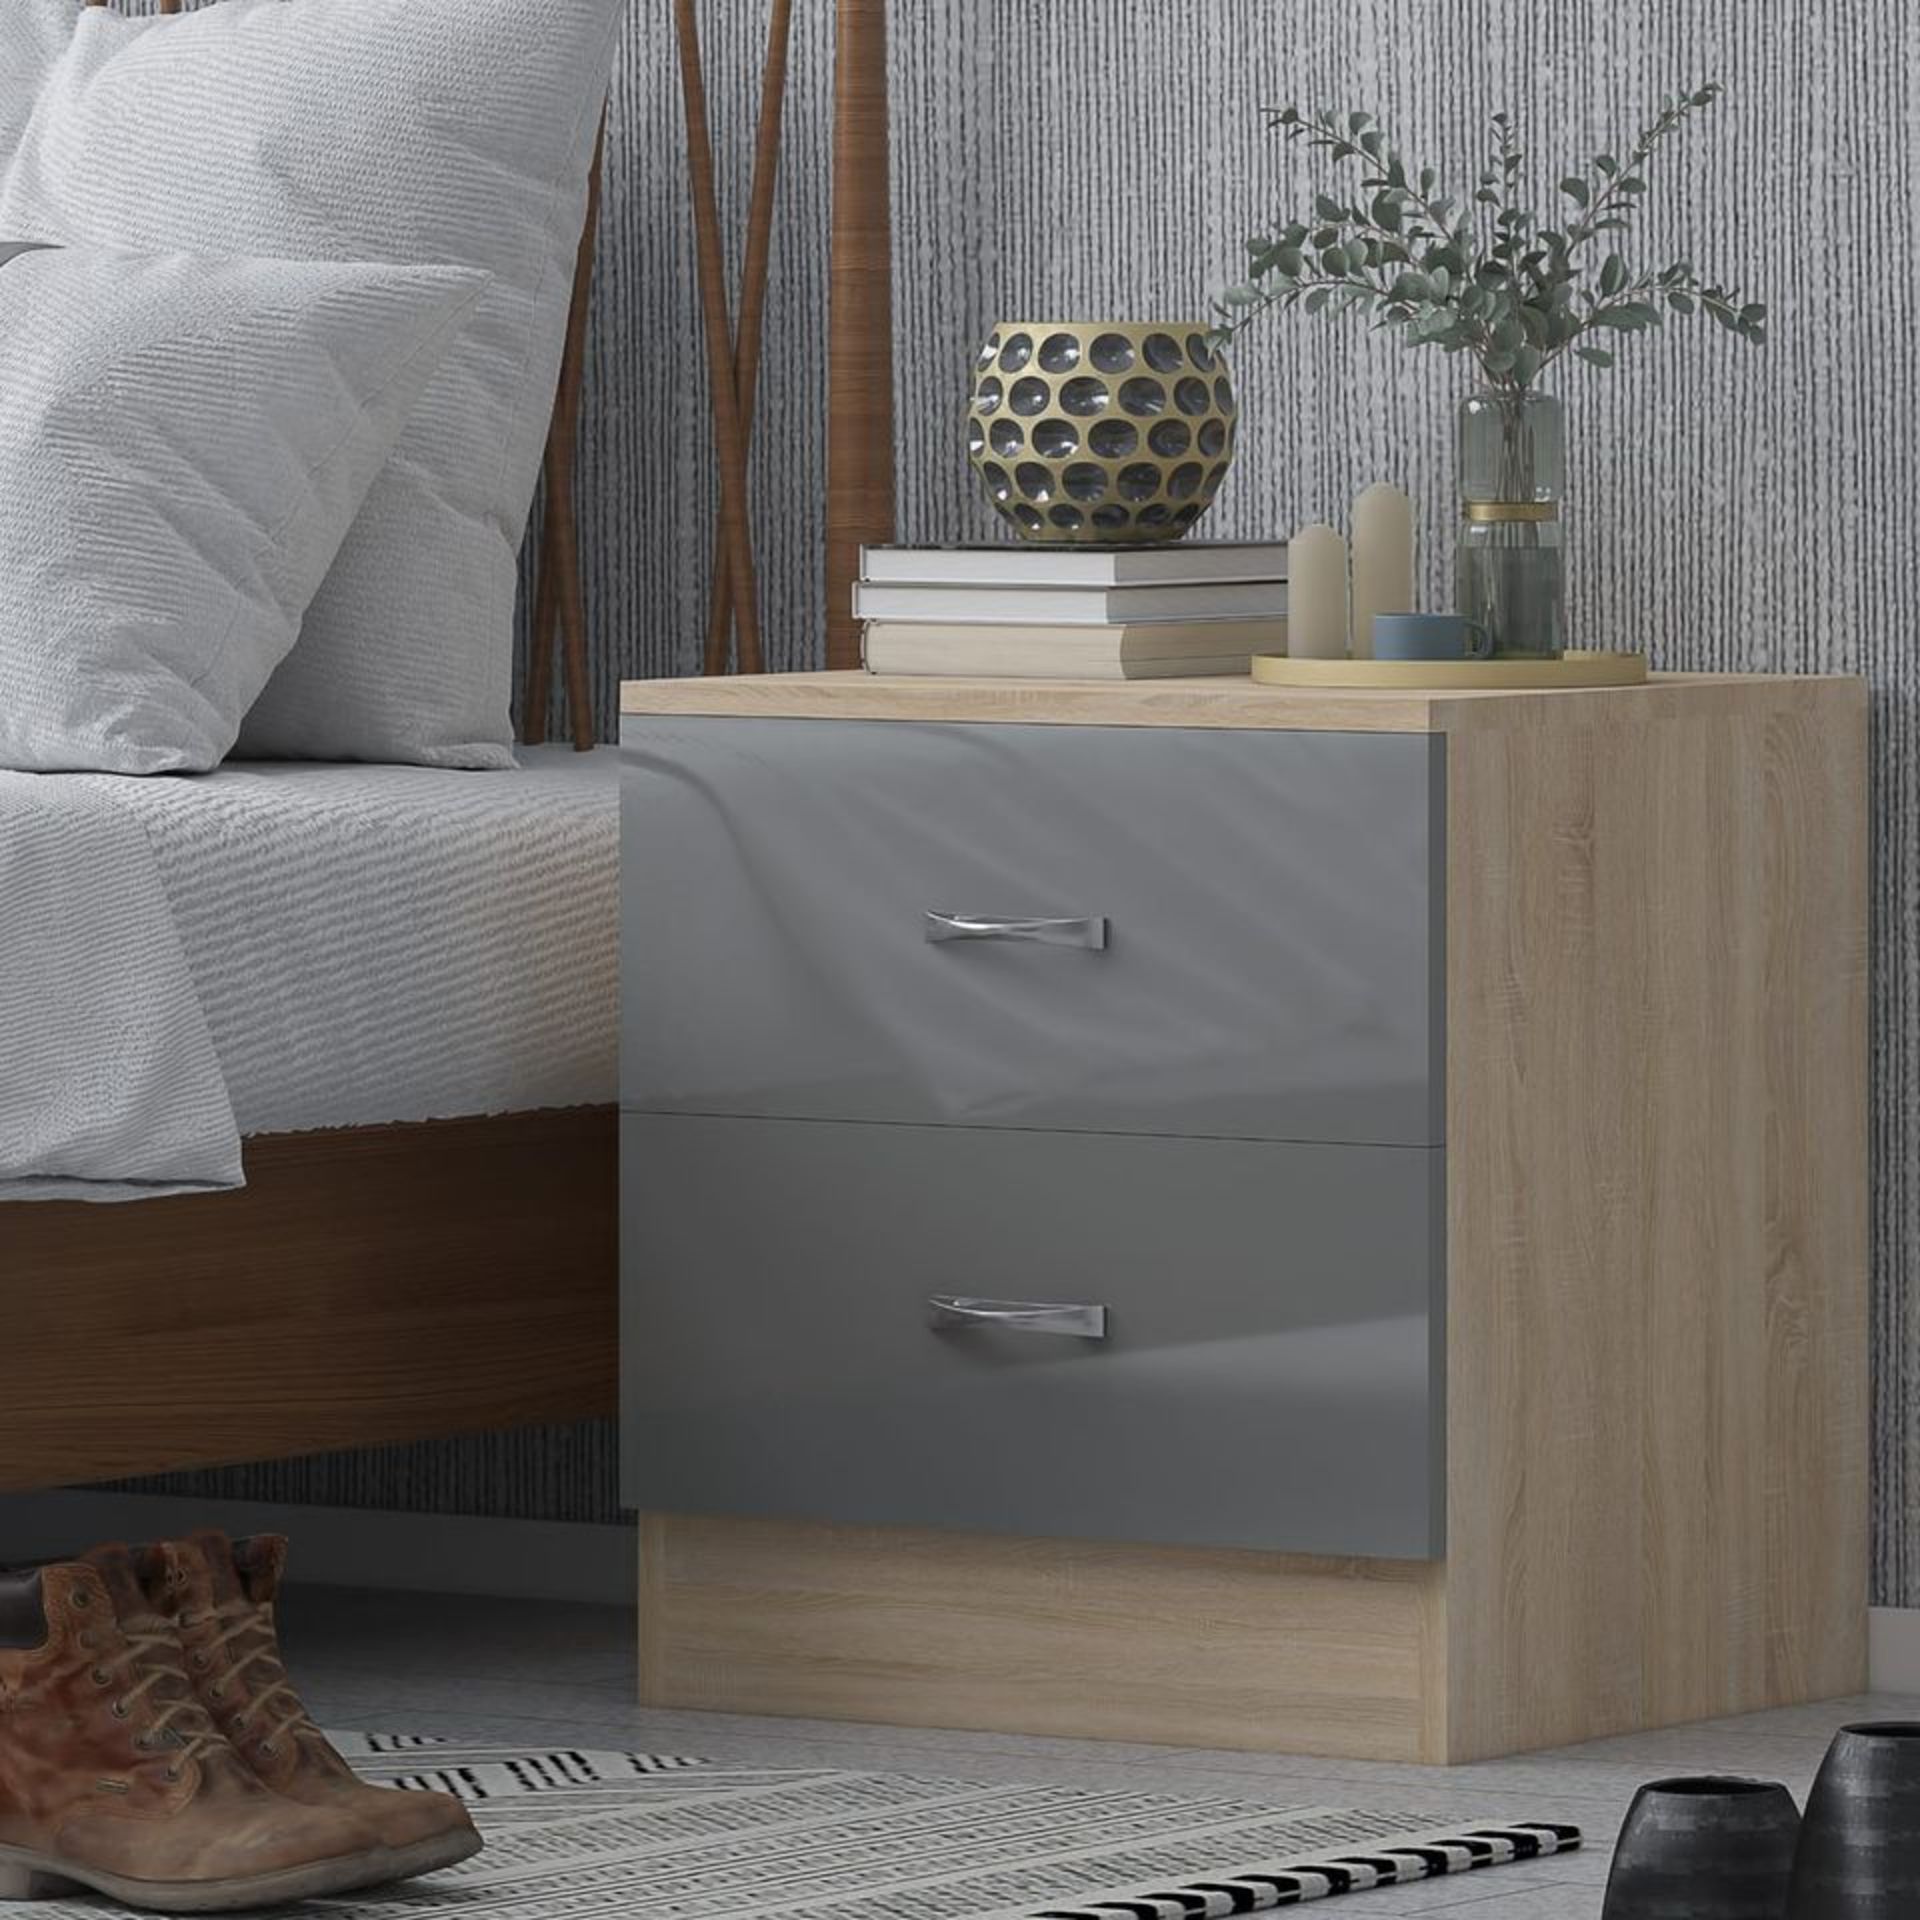 SET OF 1 X CHEST AND 1 X BEDSIDE - BRAND NEW FLATPACKED GREY GLOSS ON SONOMA OAK - Image 8 of 8